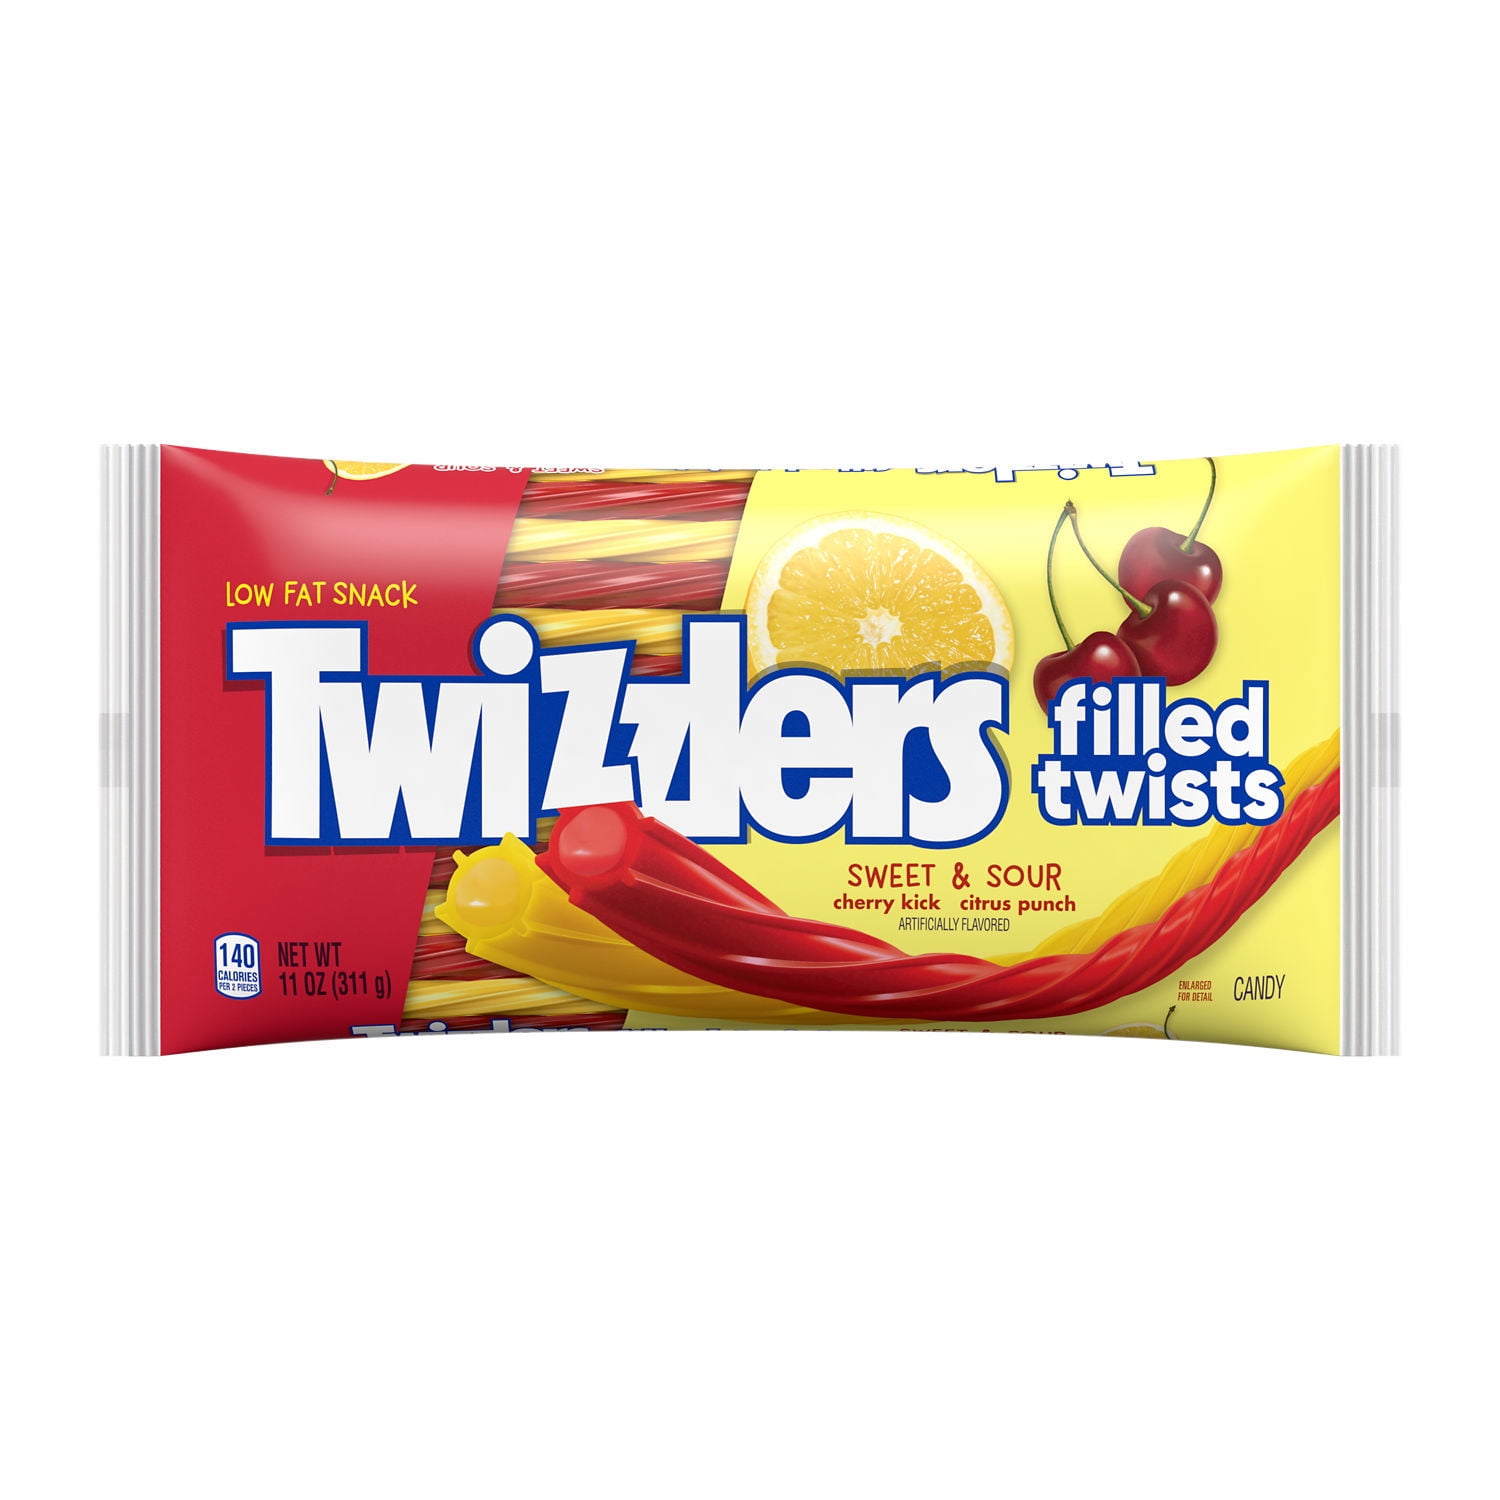 TWIZZLERS Filled Twists Sweet and Sour Cherry Kick Citrus Punch Flavored Chewy, Low Fat Candy Bag, 11 oz